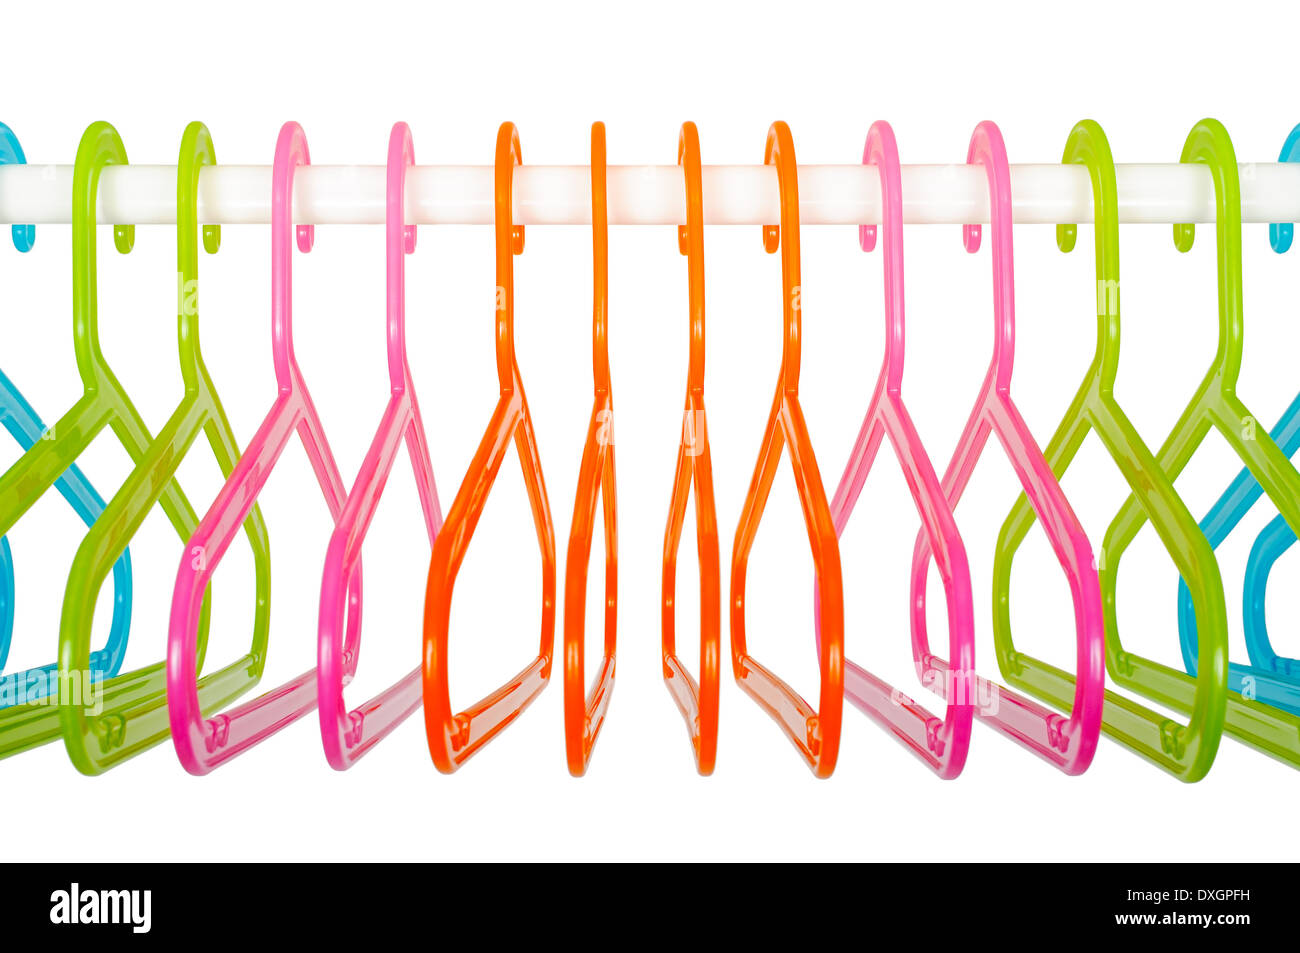 Colored plastic hangers hanging on a rod in an empty white closet Stock Photo